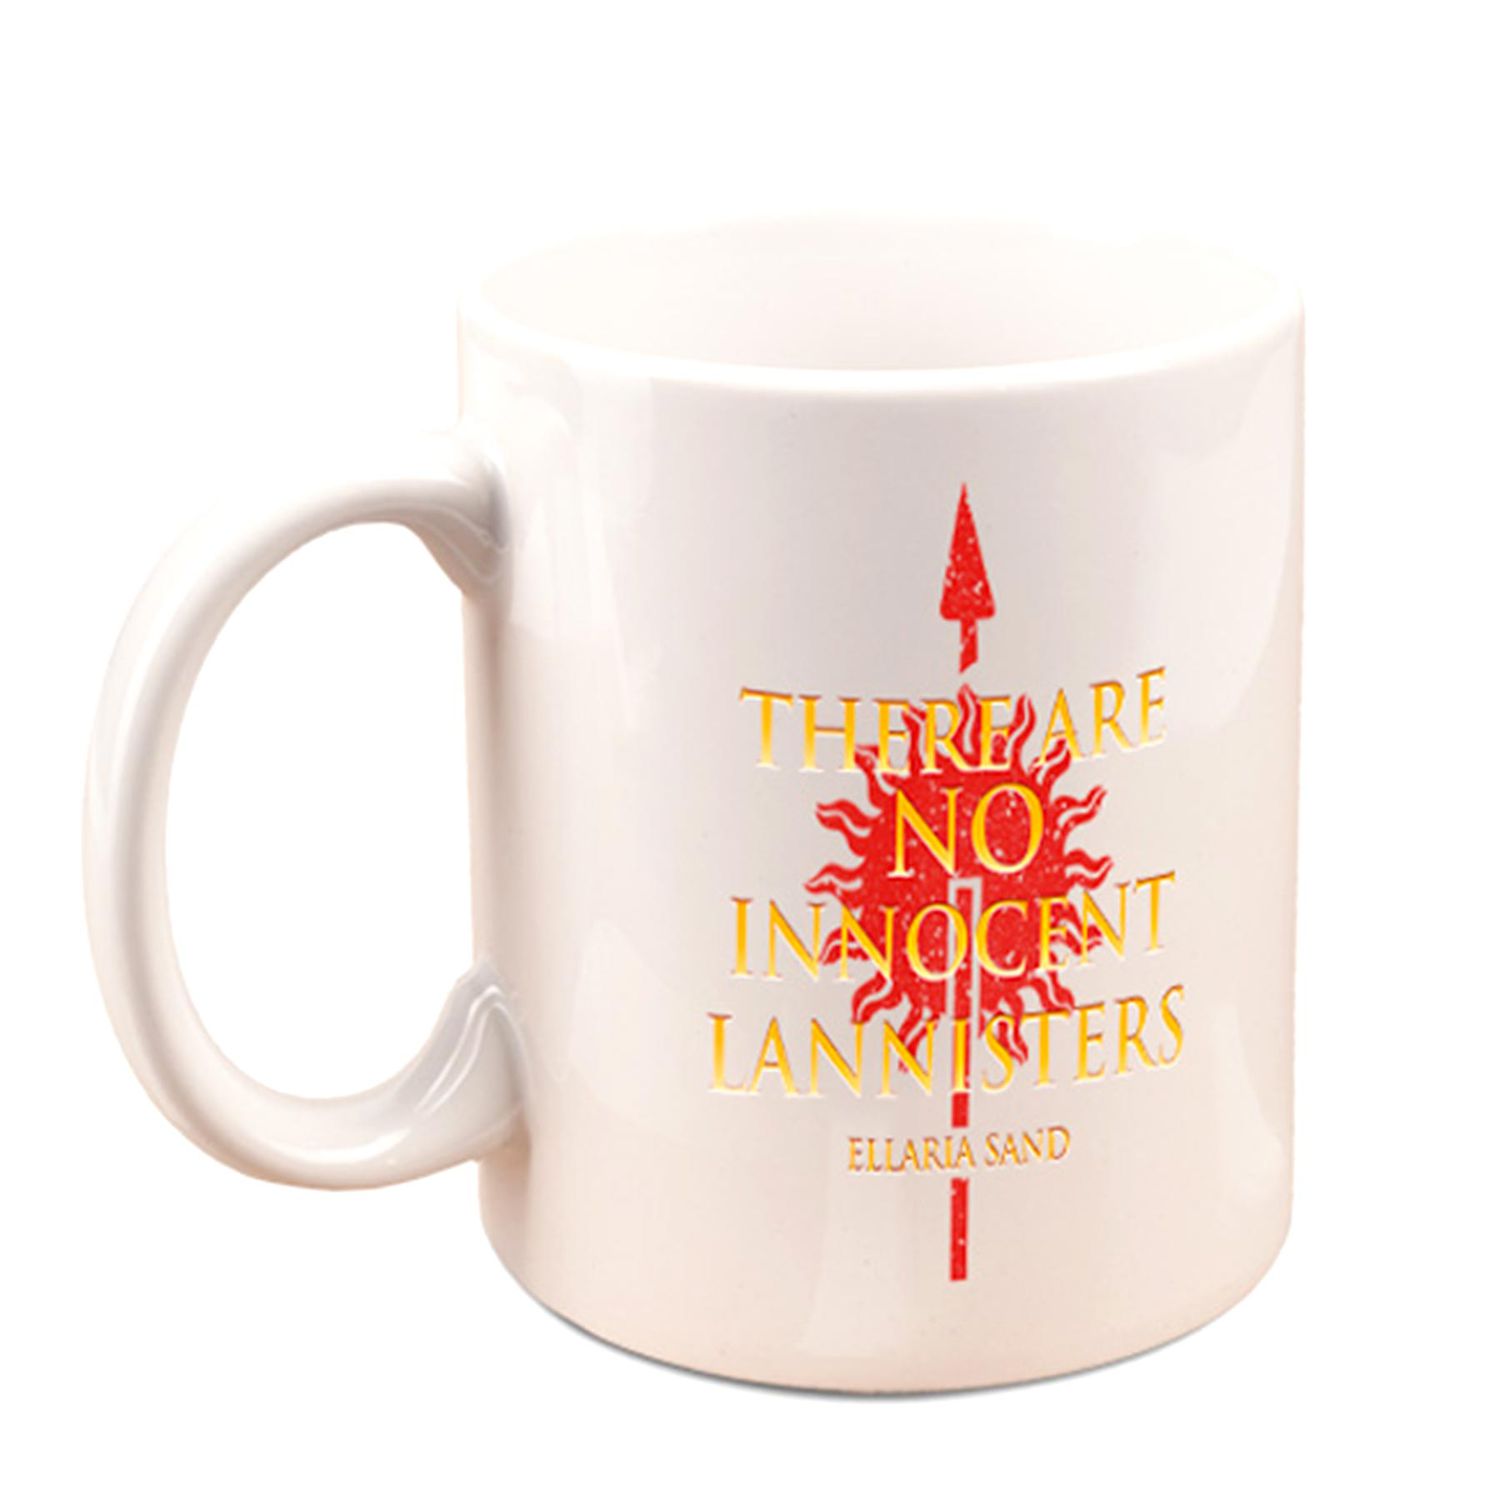 There Are No Innocent Lannisters Mug